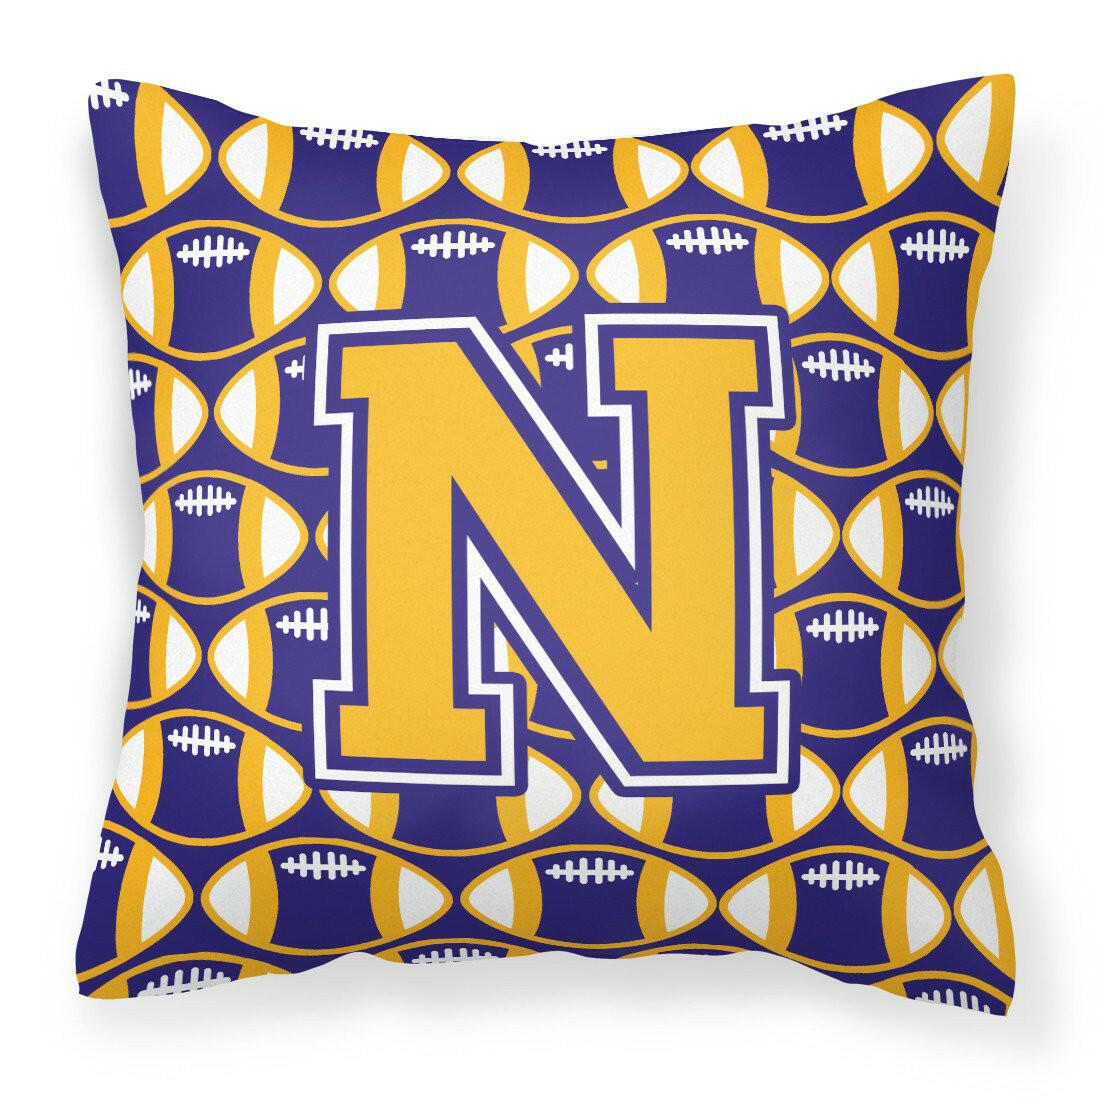 Letter N Football Purple and Gold Fabric Decorative Pillow CJ1064-NPW1414 by Caroline's Treasures